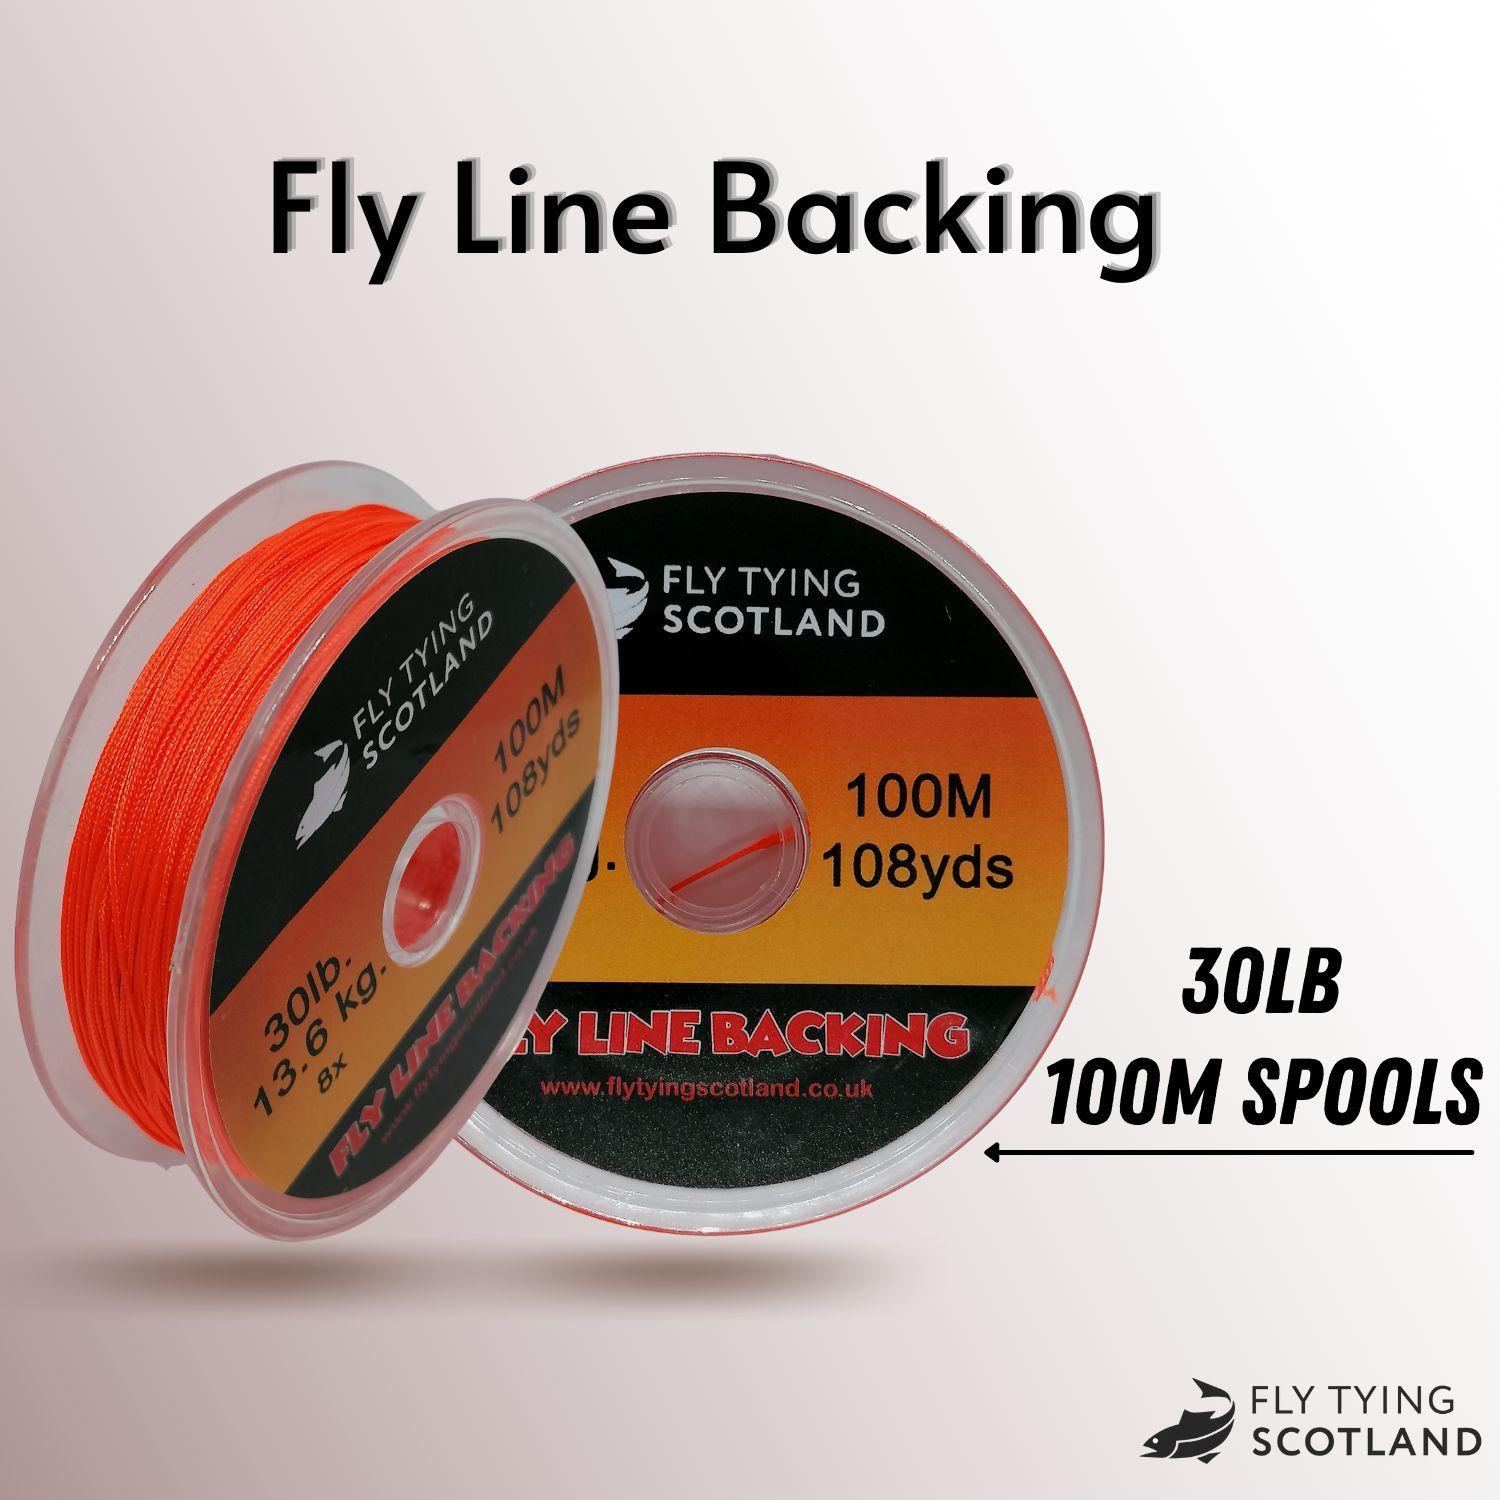 fly line backing